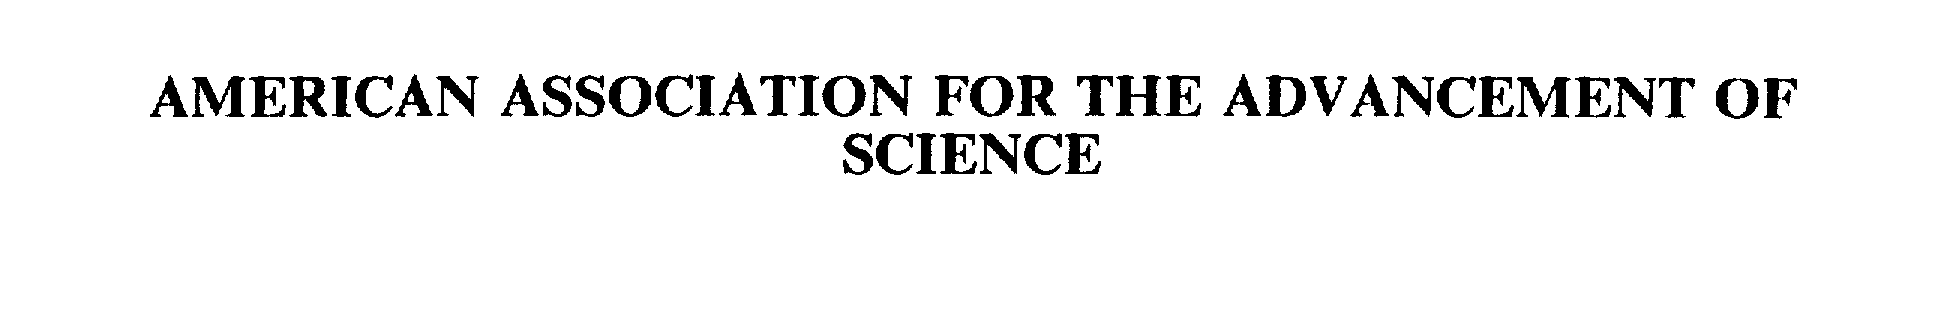  AMERICAN ASSOCIATION FOR THE ADVANCEMENT OF SCIENCE